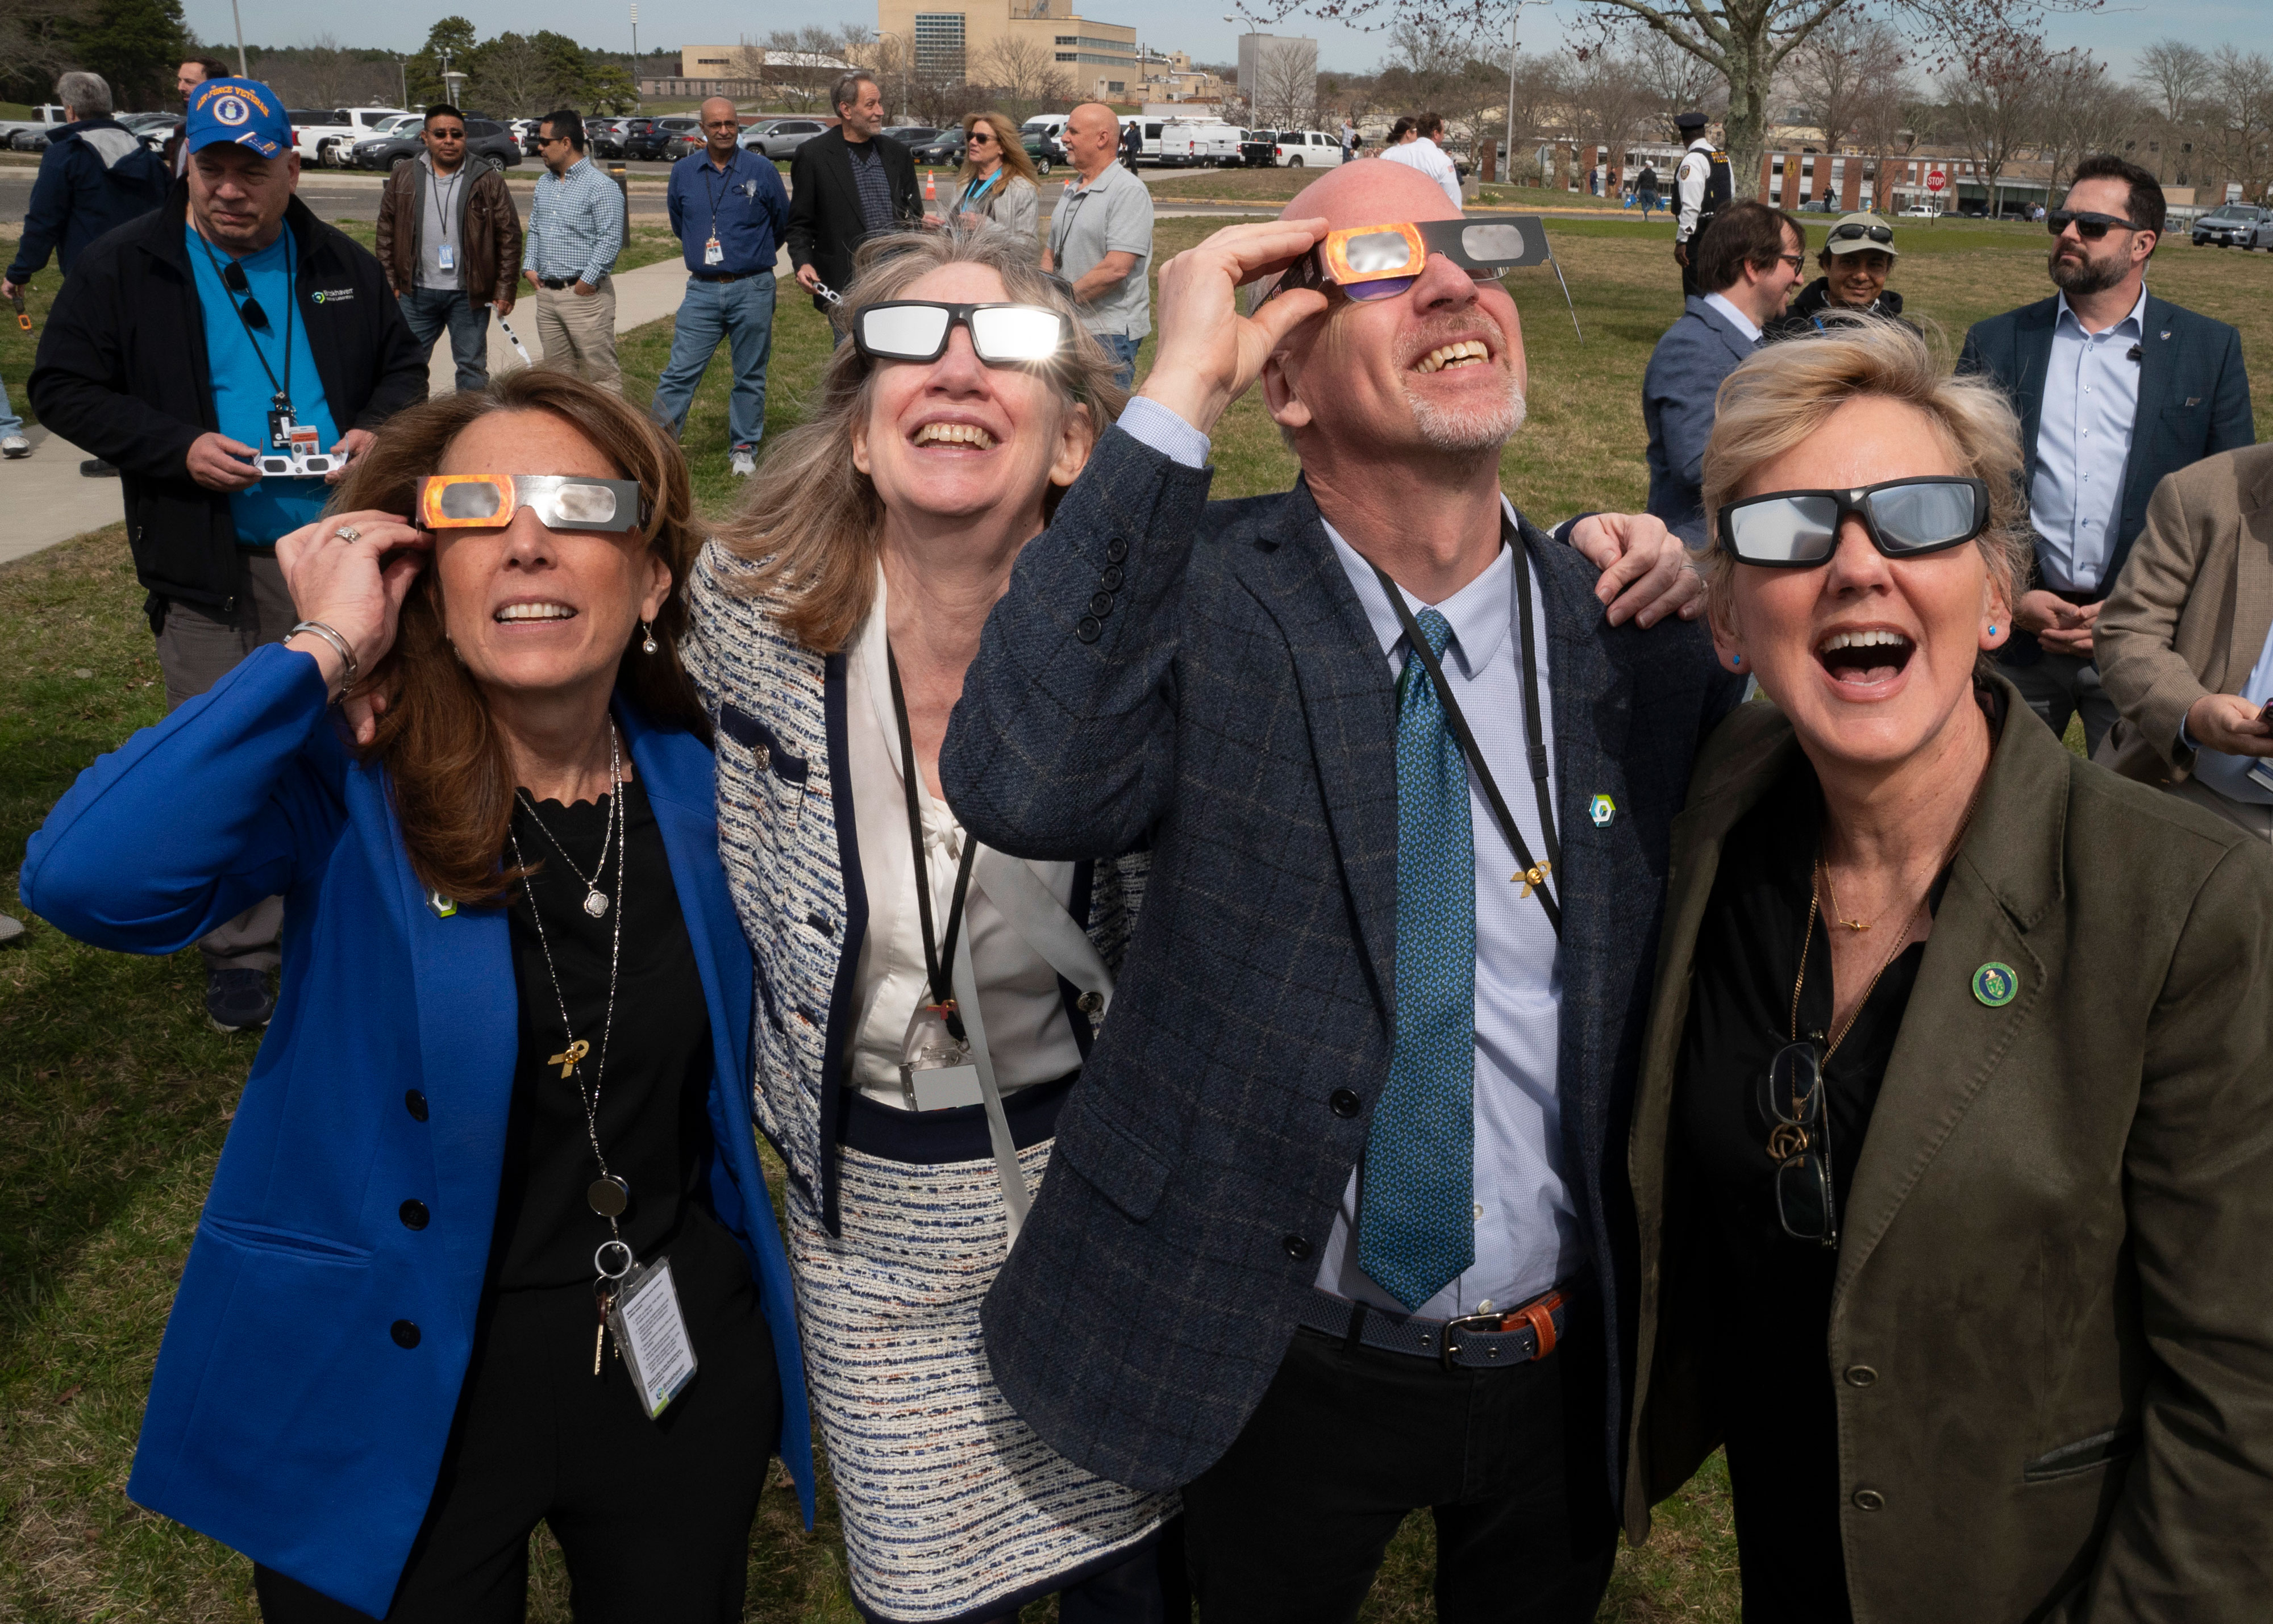 From left to right: Deputy Director for Operations Ann Emrick, Laboratory Director JoAnne Hewett, Deputy Director for Science and Technology John Hill, and Secretary Granholm during the solar eclipse on April 8.